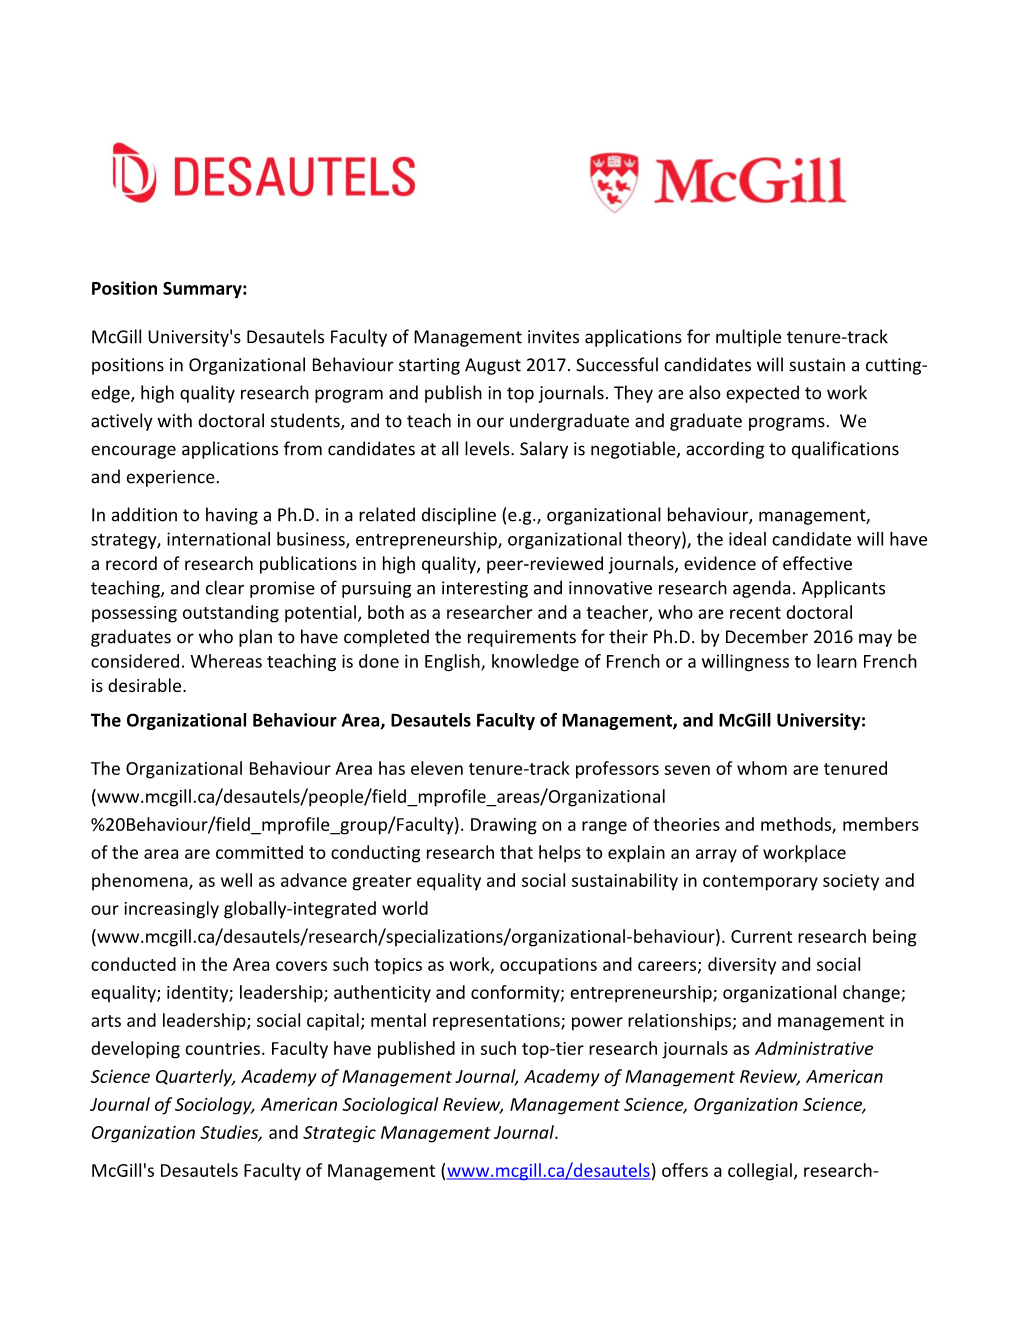 The Organizational Behaviour Area, Desautels Faculty of Management, and Mcgill University